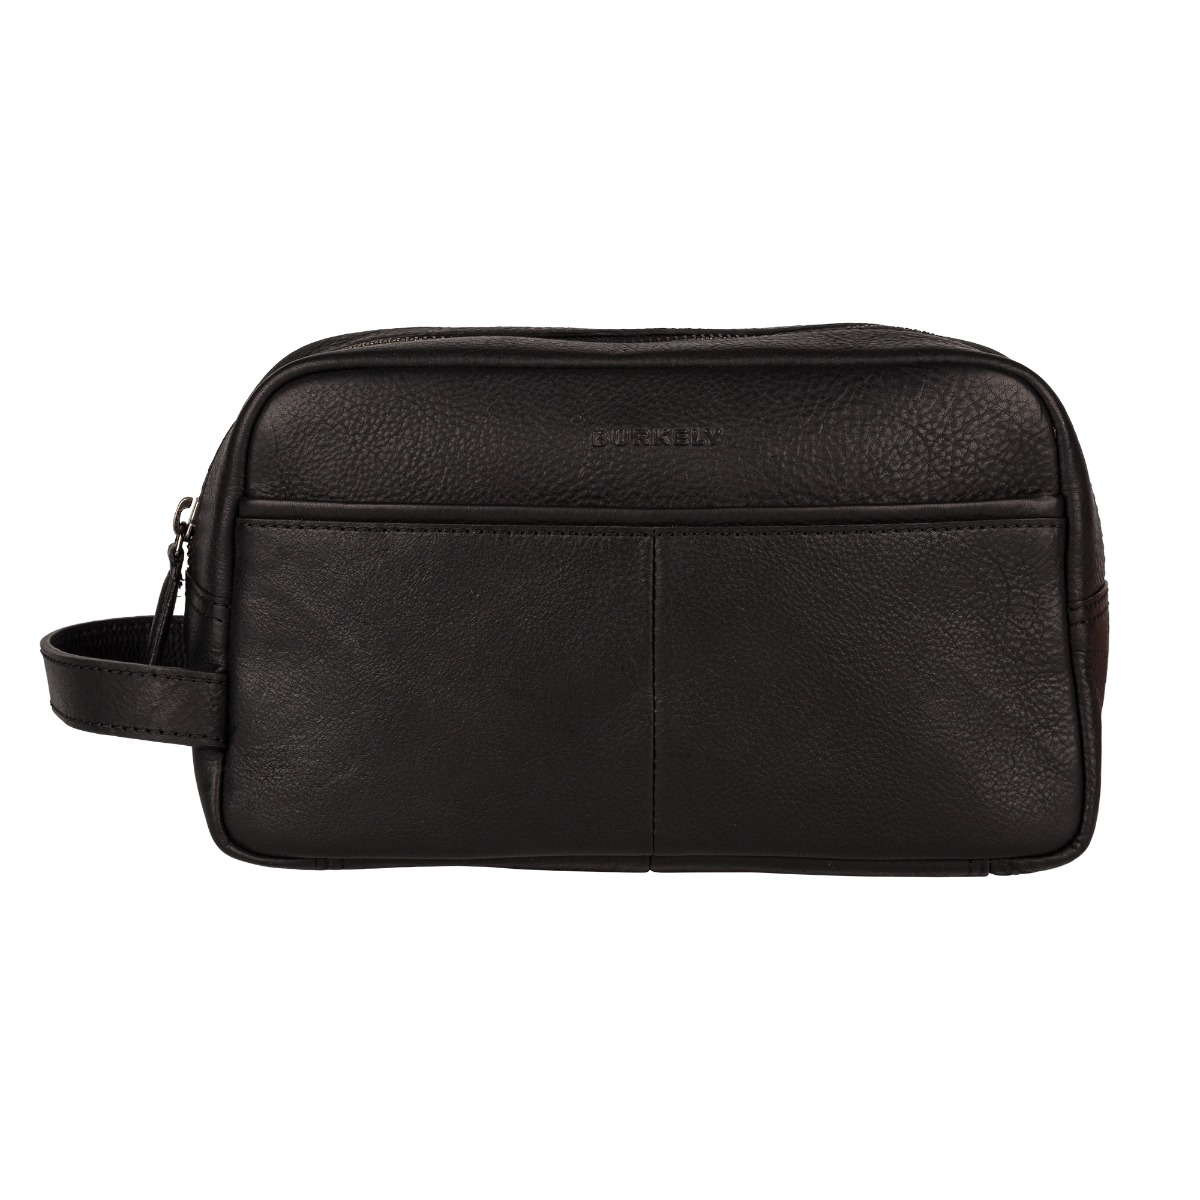 Burkely Antique Avery Toiletry Bag Black